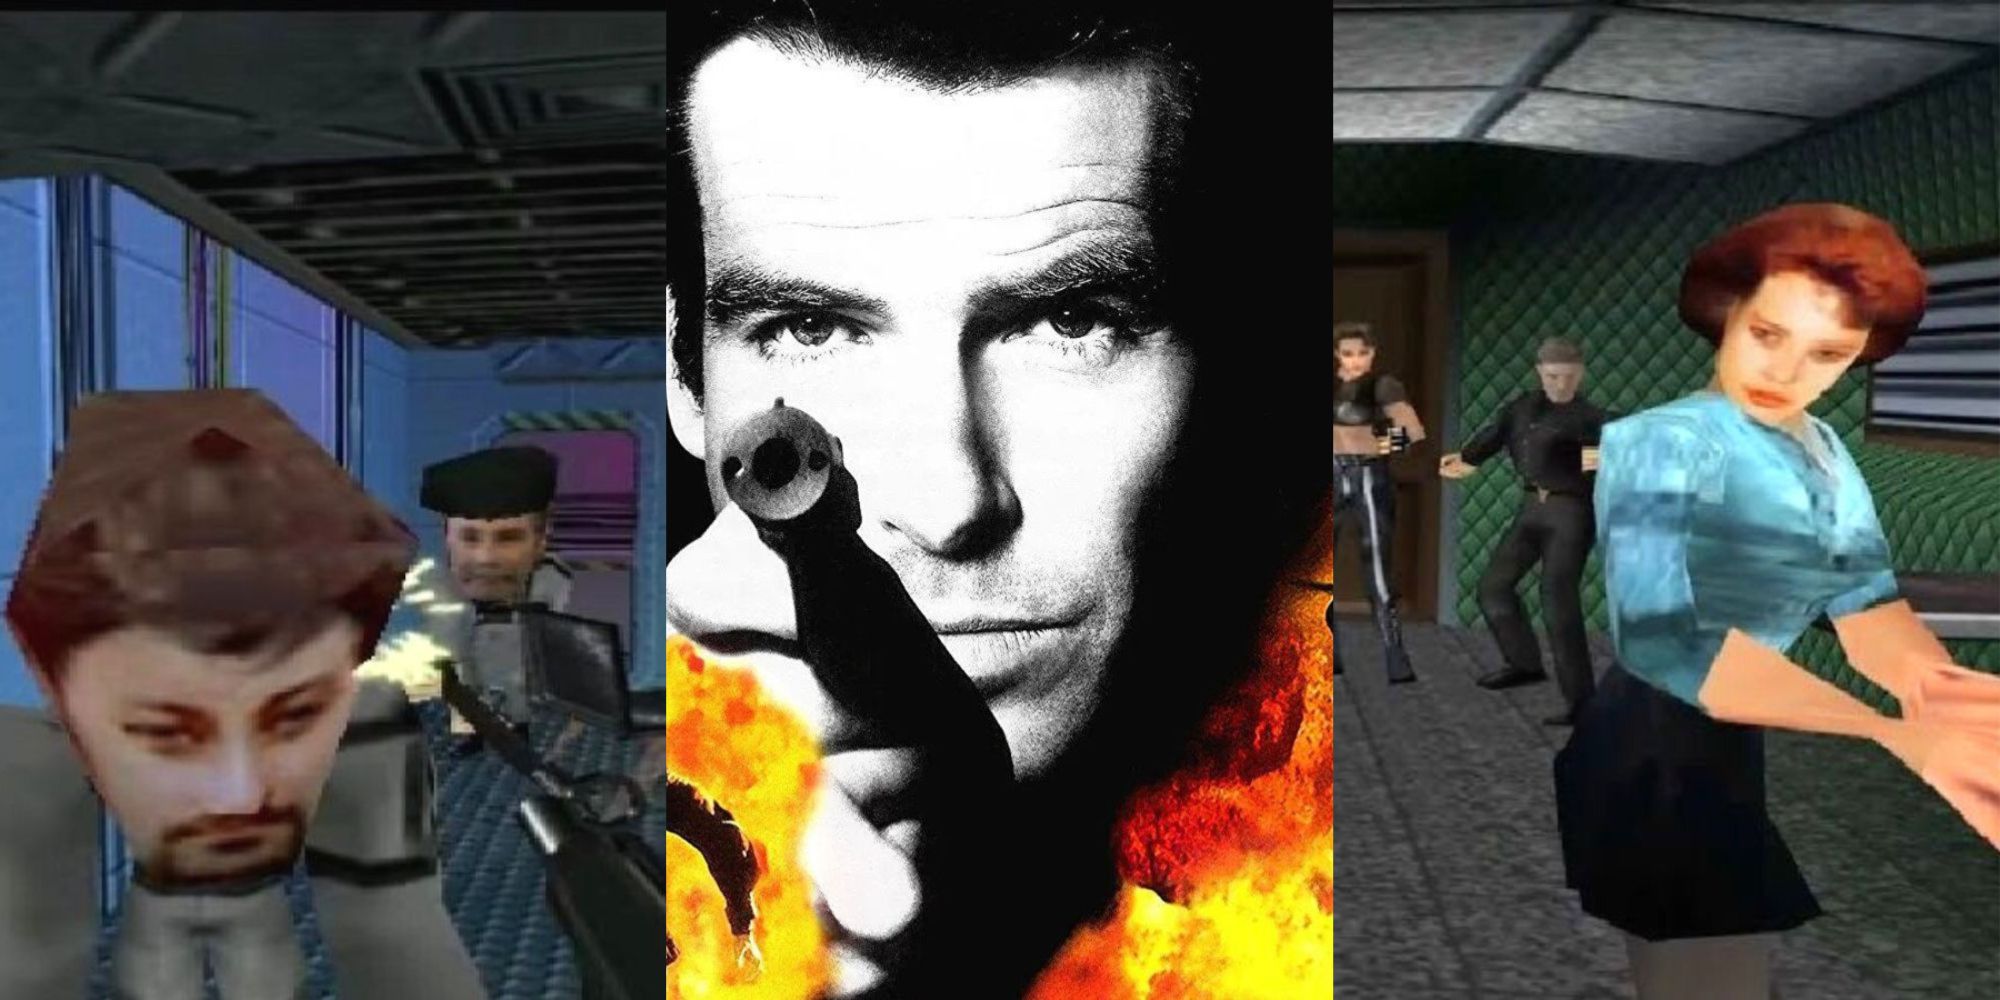 GoldenEye 007 Remastered is Fantastic and Frustrating - Macho